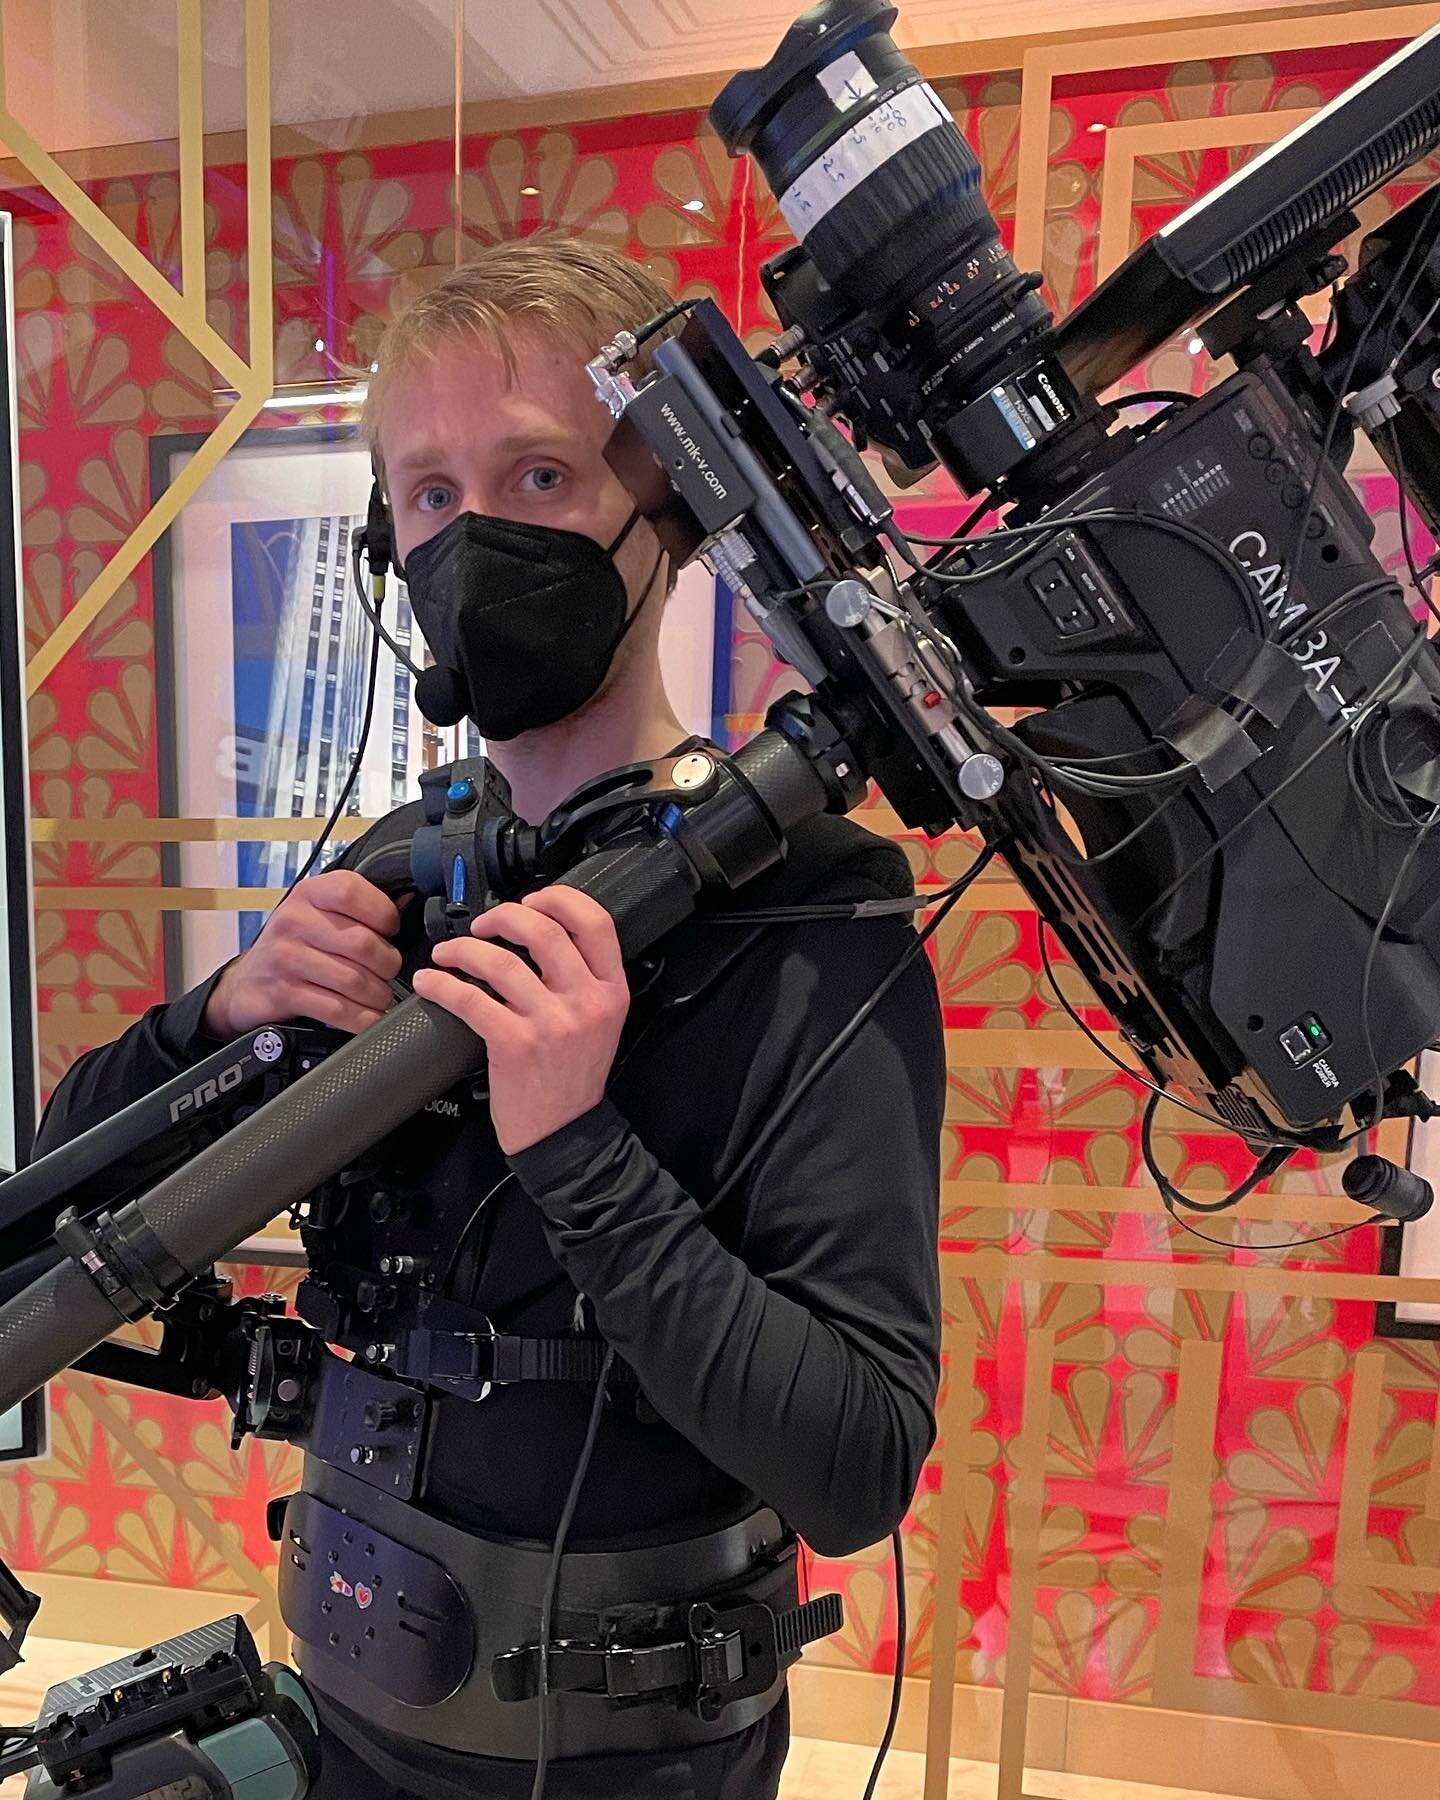 Rare face pic even if it&rsquo;s mostly hidden. (Trust me, it&rsquo;s better that way)

#steadicam #steadicamoperator #steadicamlife #steadicamops #steadicamoperators